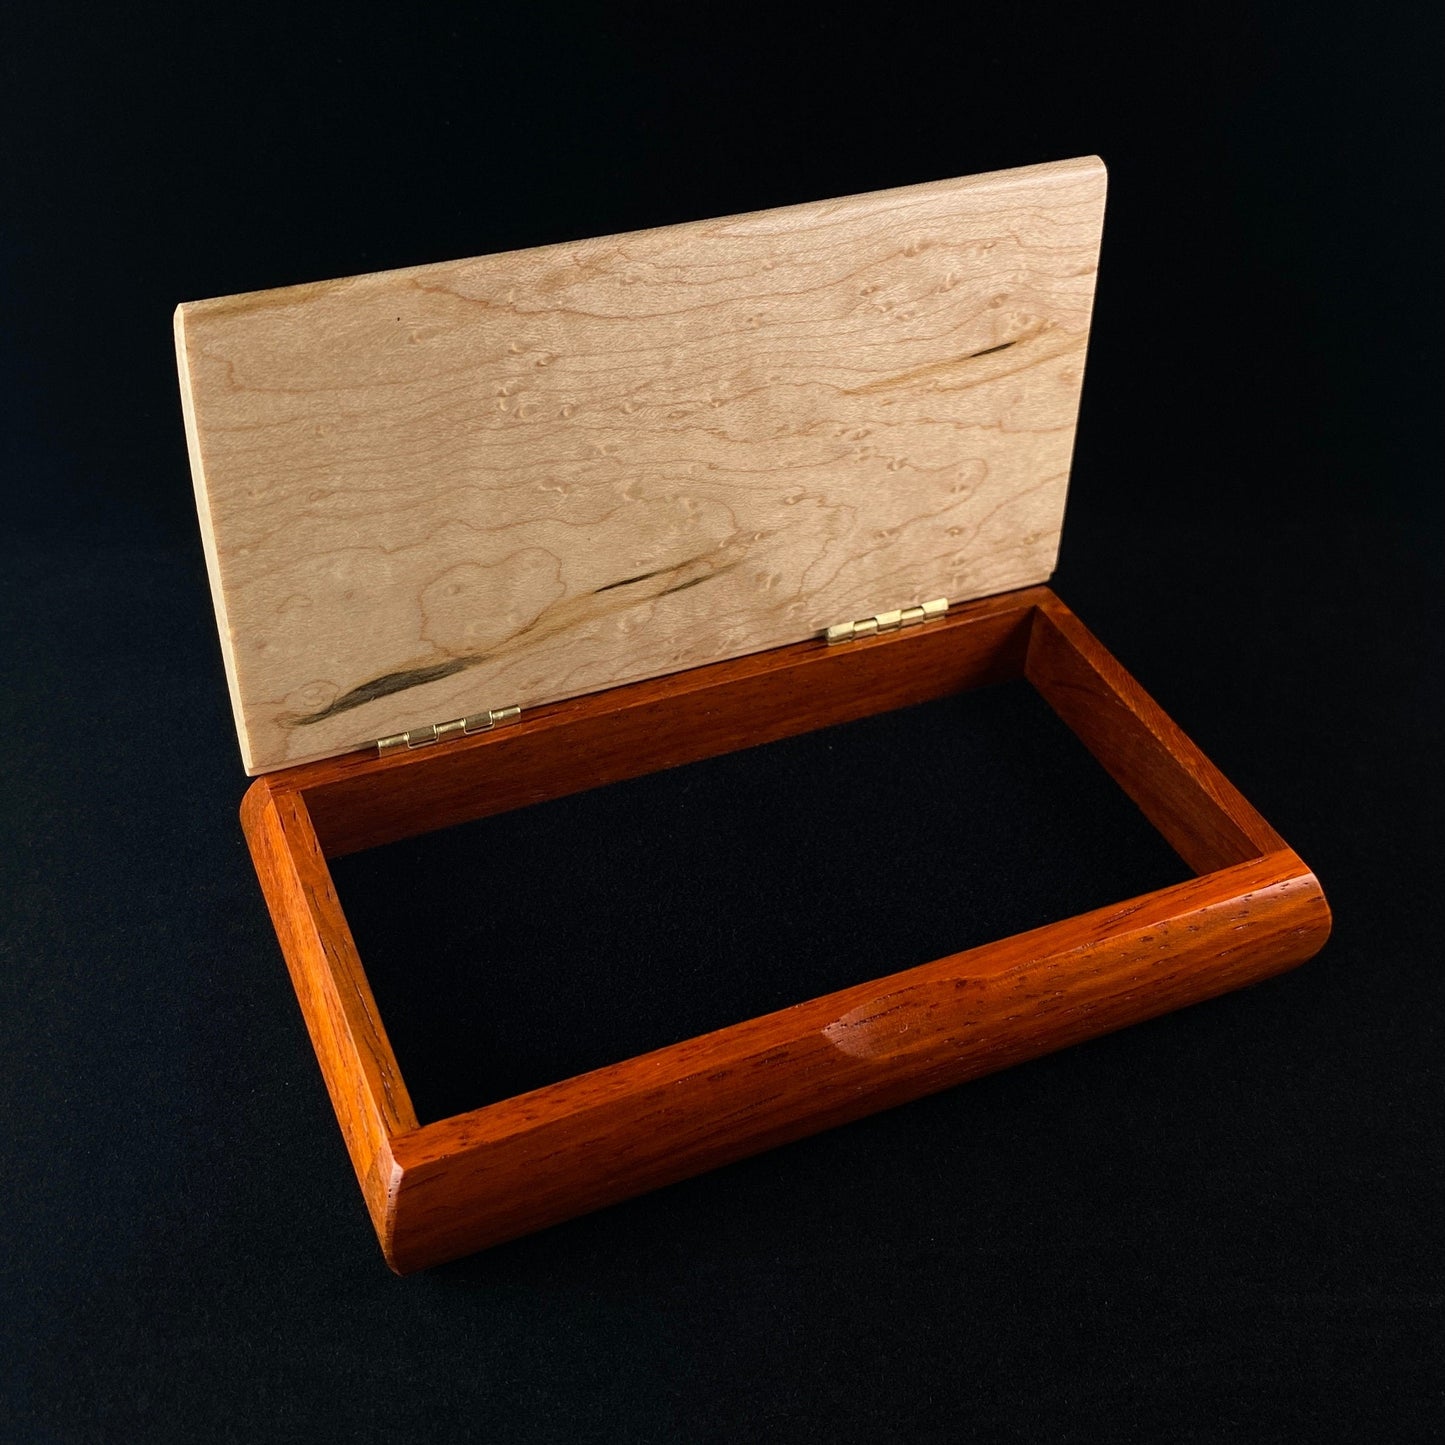 Good Friends Are Like Stars Quote Box, Handmade Wooden Box with Birdseye Maple and Padauk, Made in USA